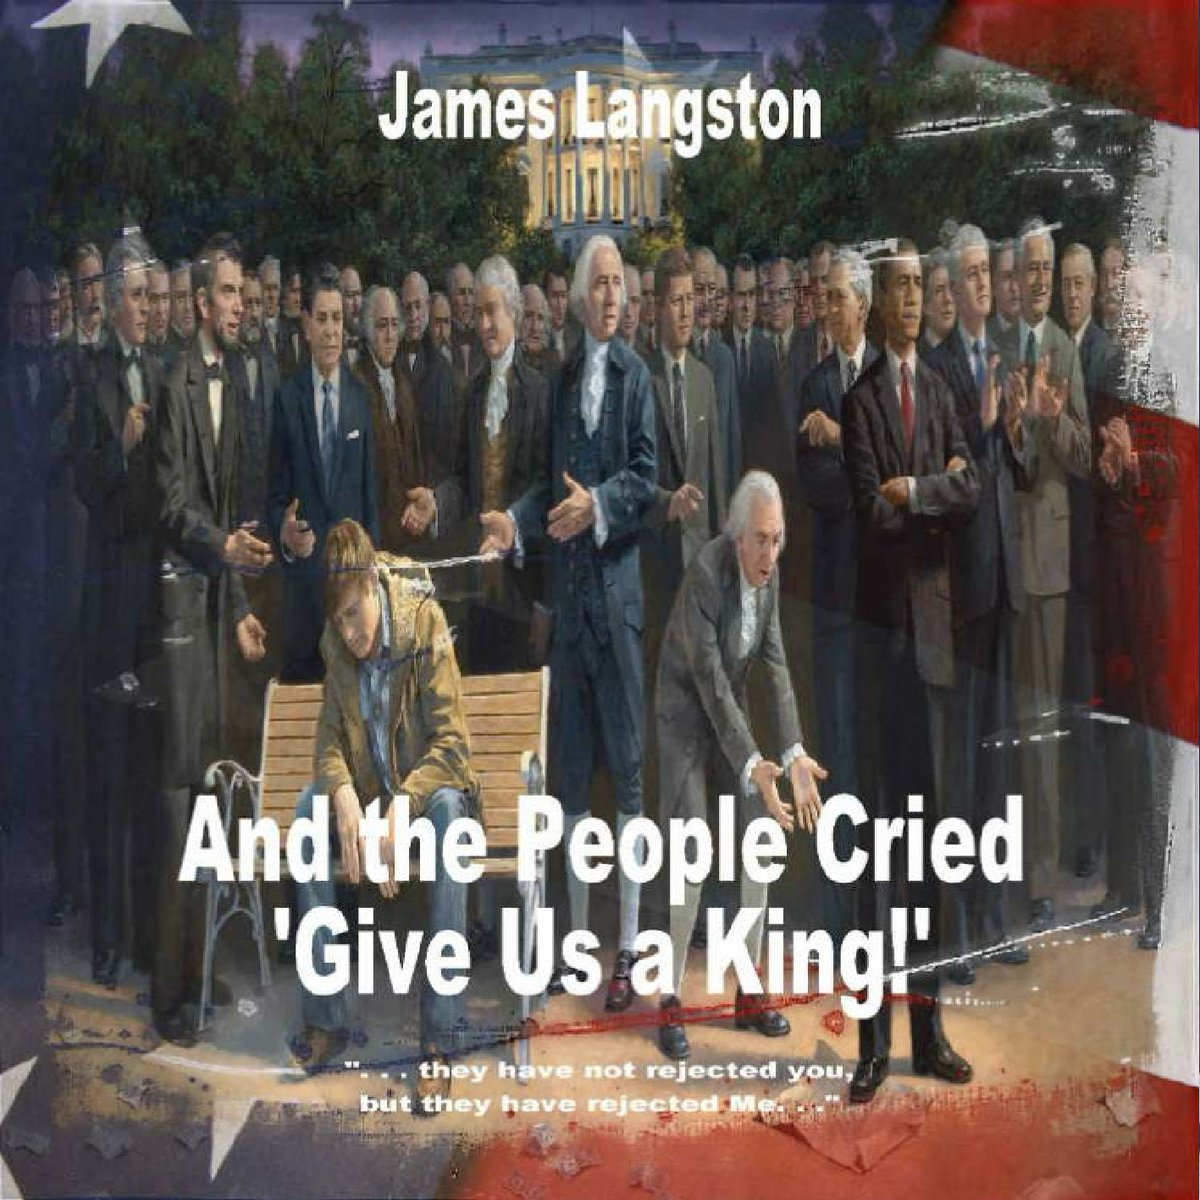 'And the People Cried, 'Give Us A King'! (Paperback/James Langston/$10.55/172 pages) [zcu.io/fUqr] Our nation is in trouble. If we do not fix our systemic issues, & soon, we may run out of time. #inspiration #Motivation #CivilUnrest #rioting #poverty #BookOfTheMonth